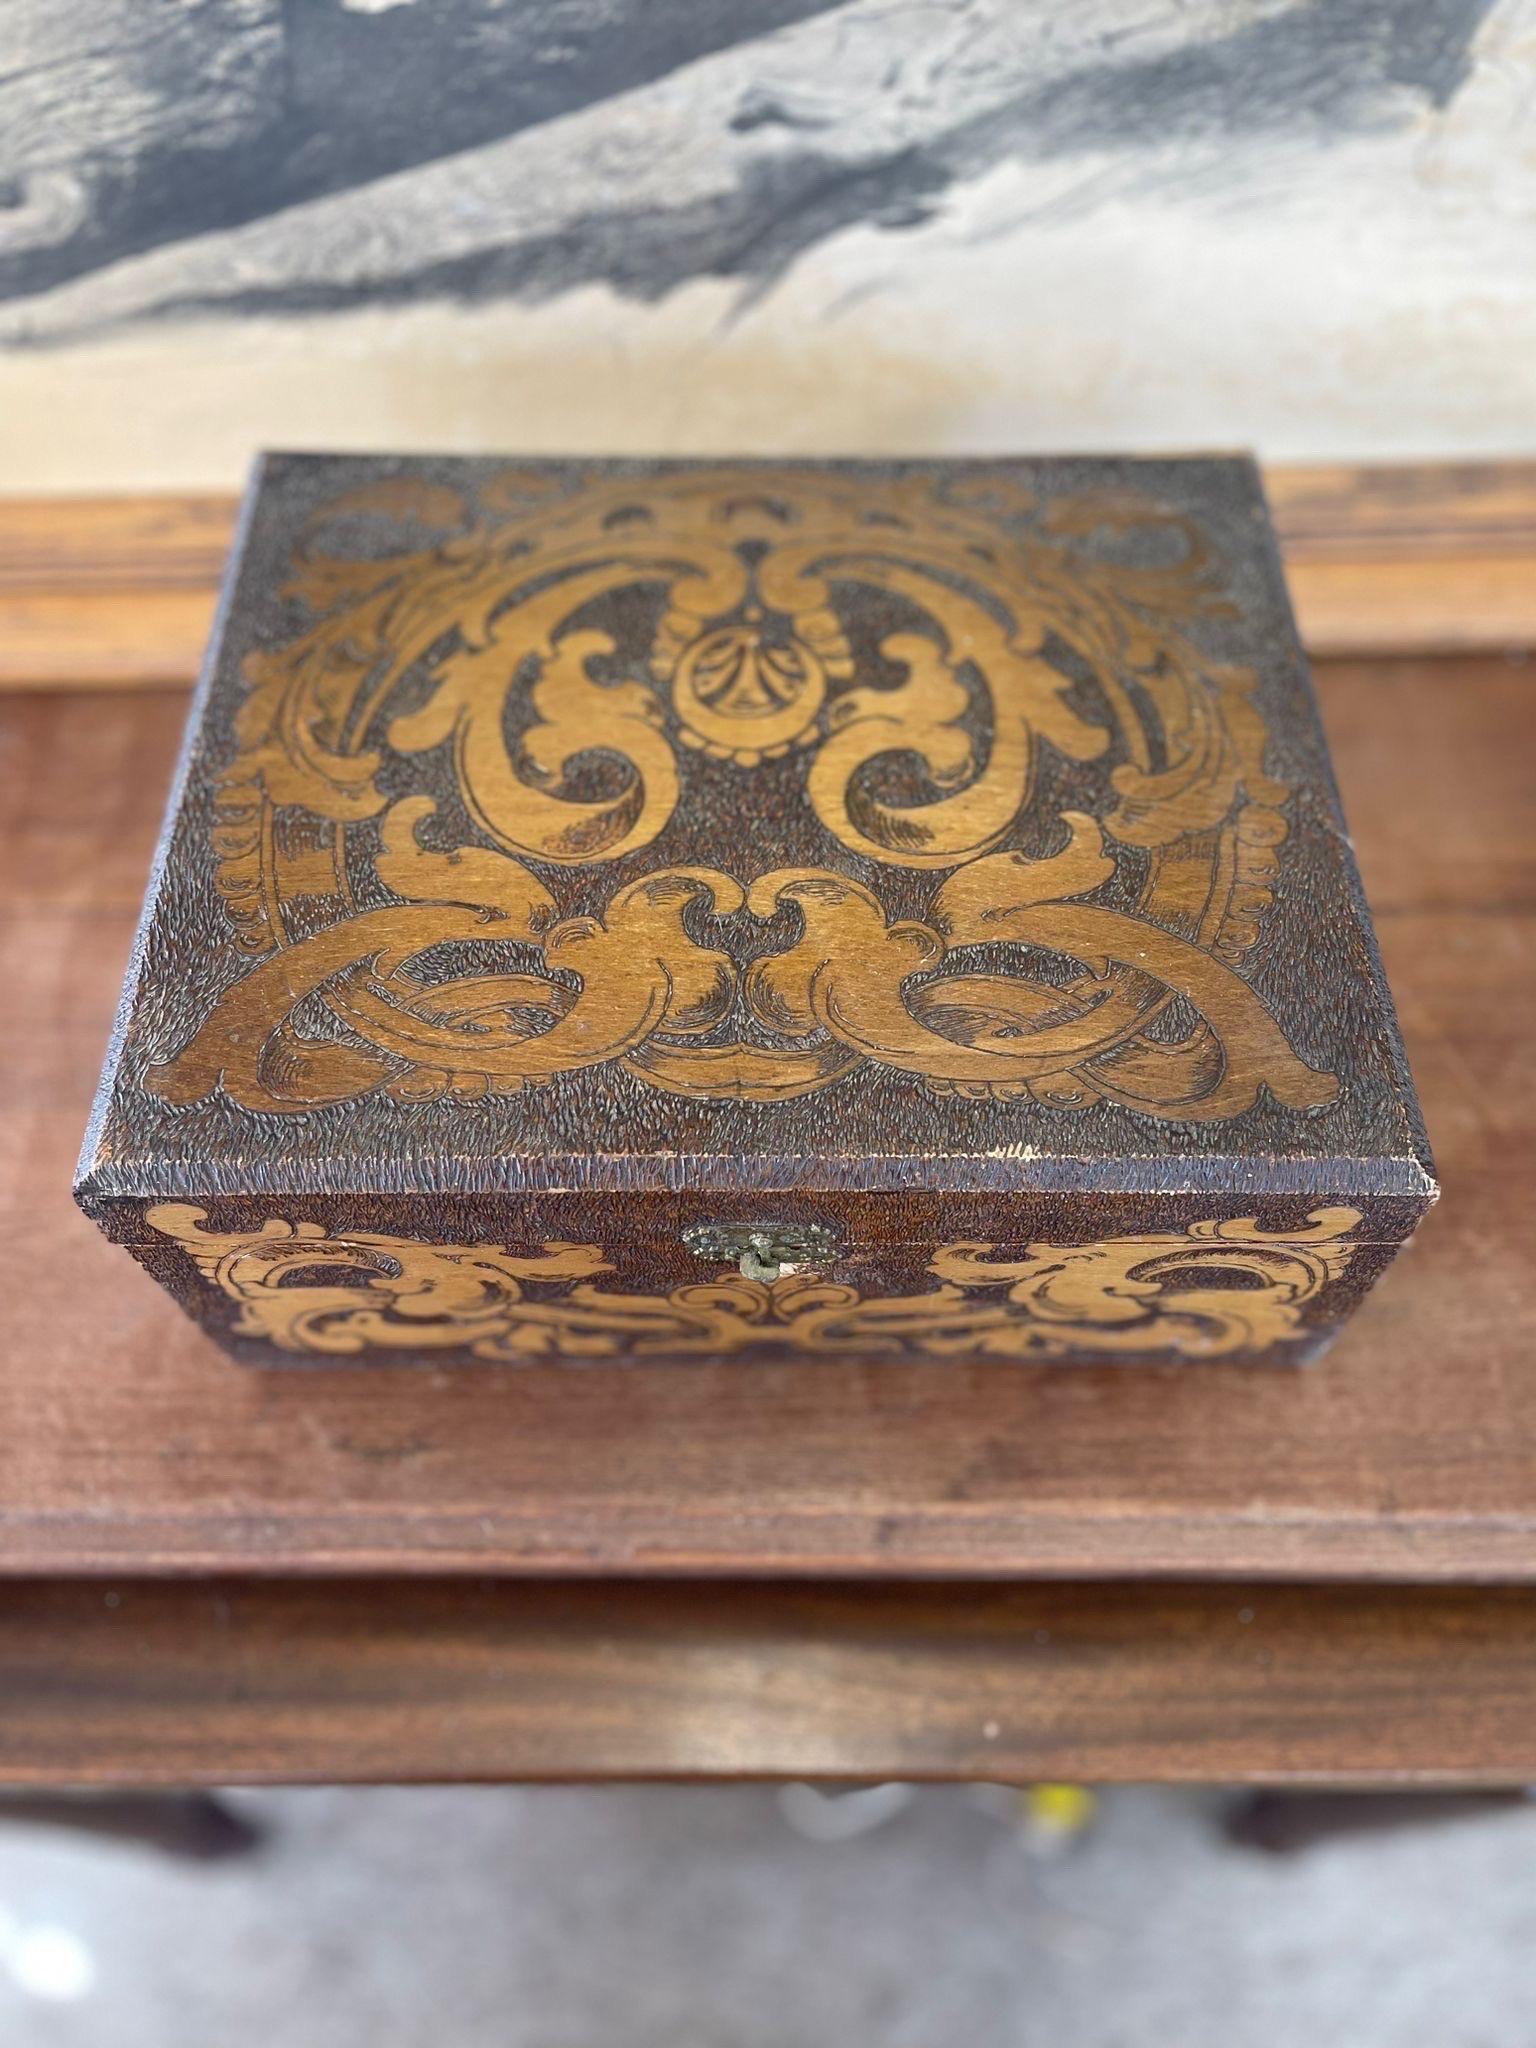 Red Stained Wooden Box with Burned Motifs on All Sides and Top.Cracks and wear Consistent with Age as Pictured.

Dimensions. 11 W ; 9 D ; 5 1/2 He 